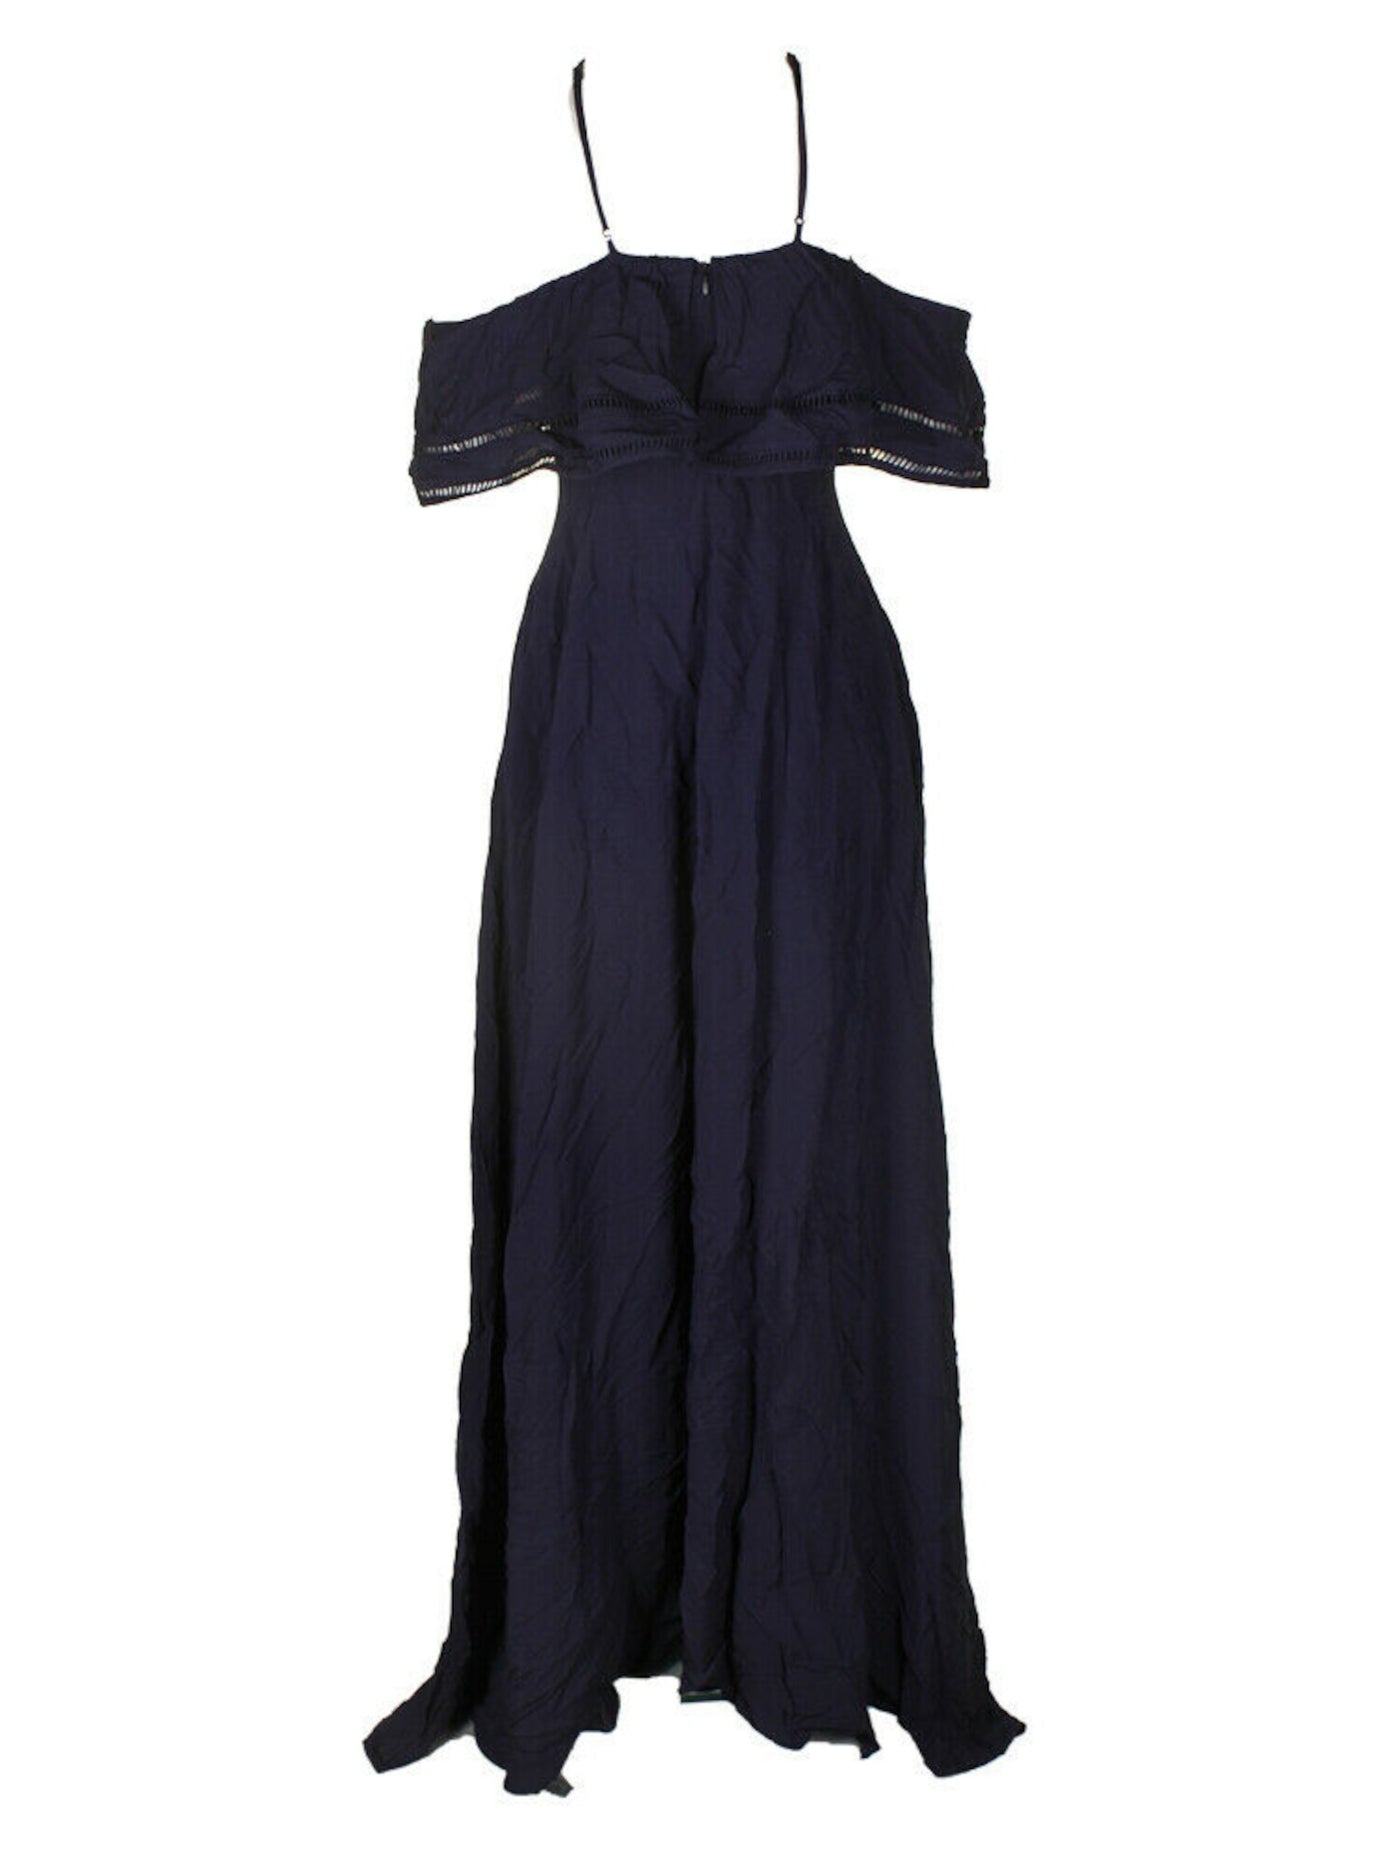 MARE MARE Womens Navy Cold Shoulder Gown Full-Length Evening Dress Size: S